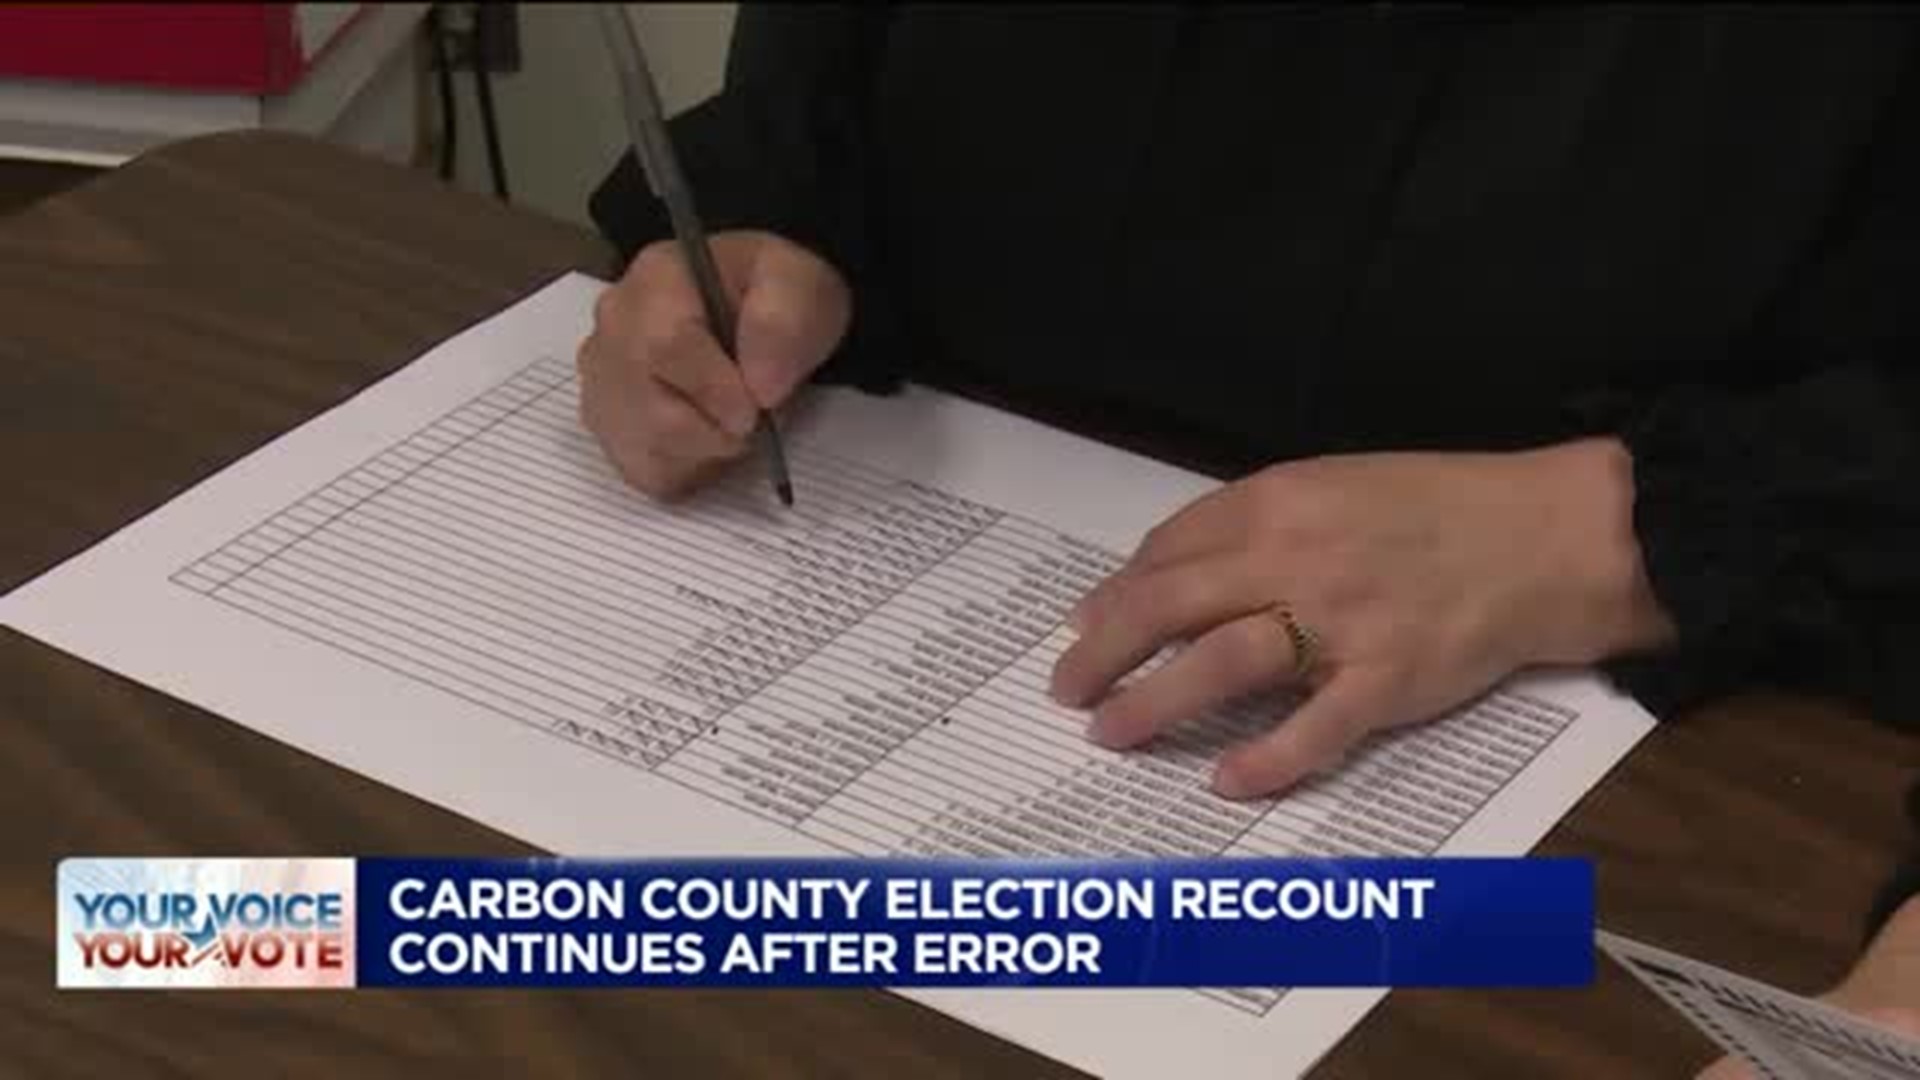 Carbon County Election Recount Continues After Error